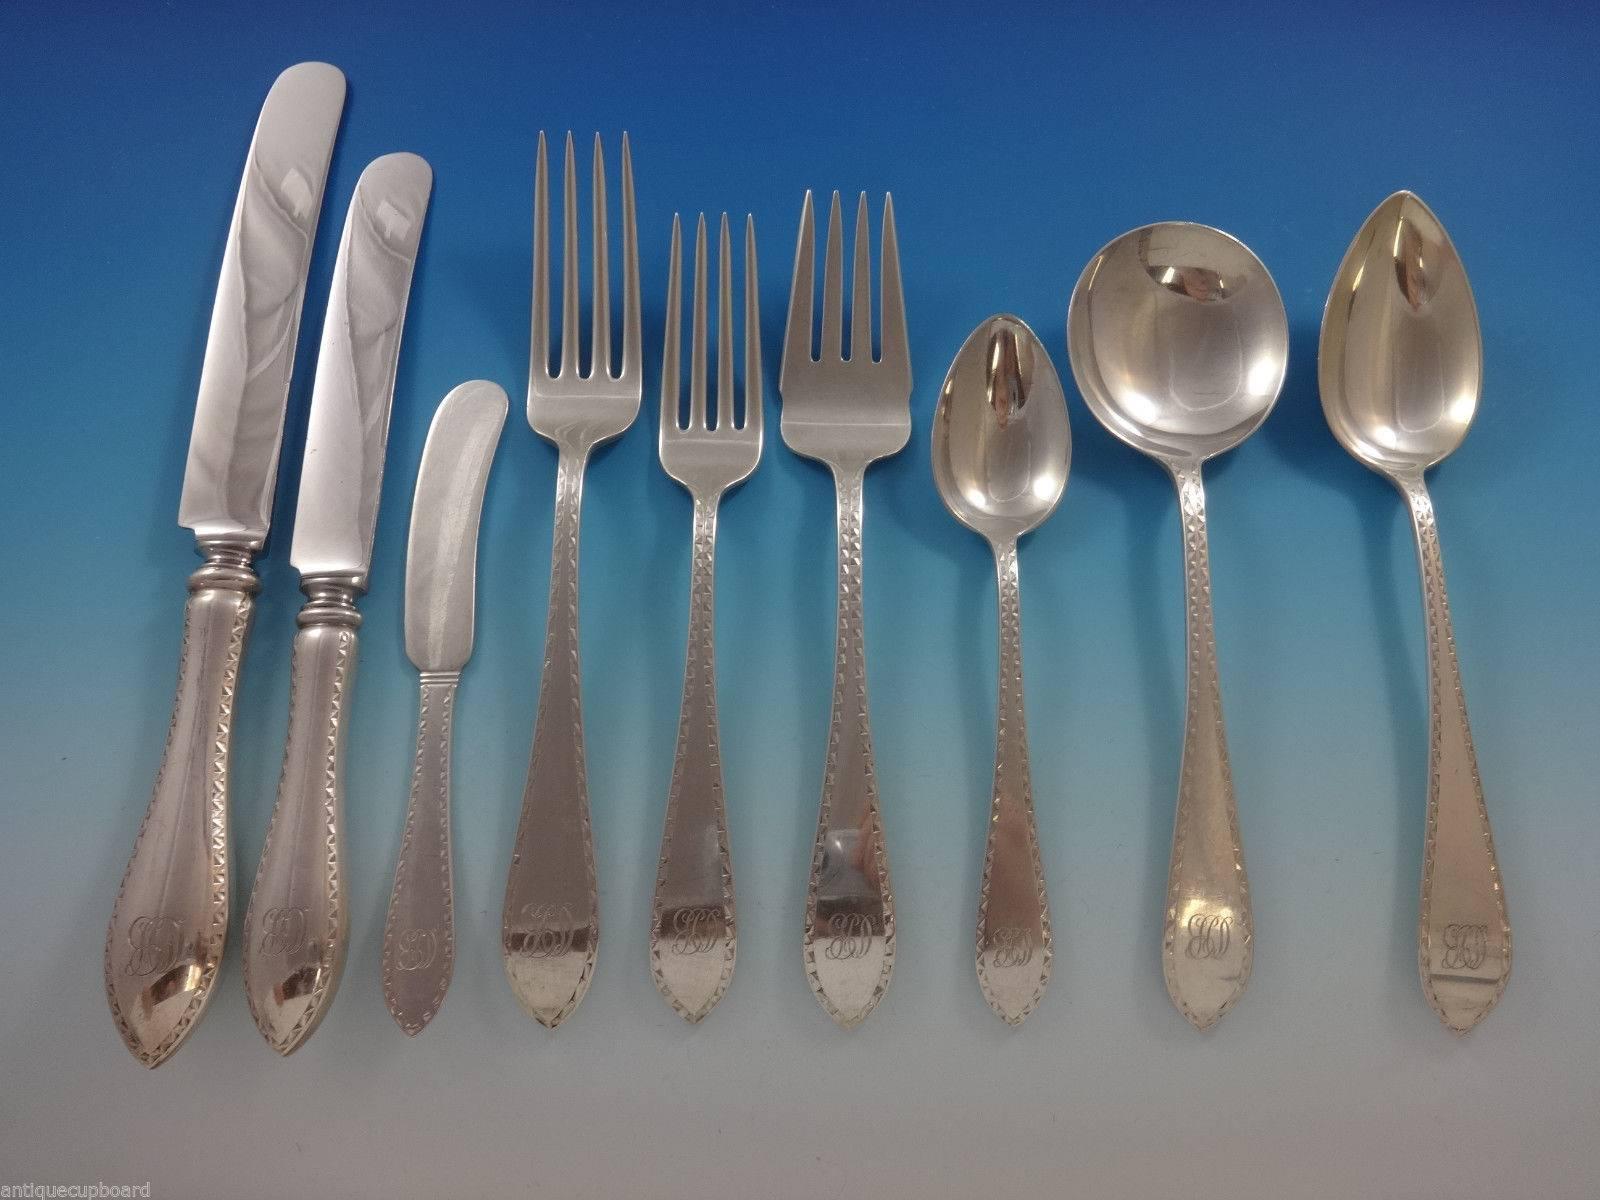 Beautiful pointed antique engraved by Dominick & Haff huge dinner & luncheon sterling silver flatware set - 119 pieces. This set includes:

12 dinner size knives, 9 1/2